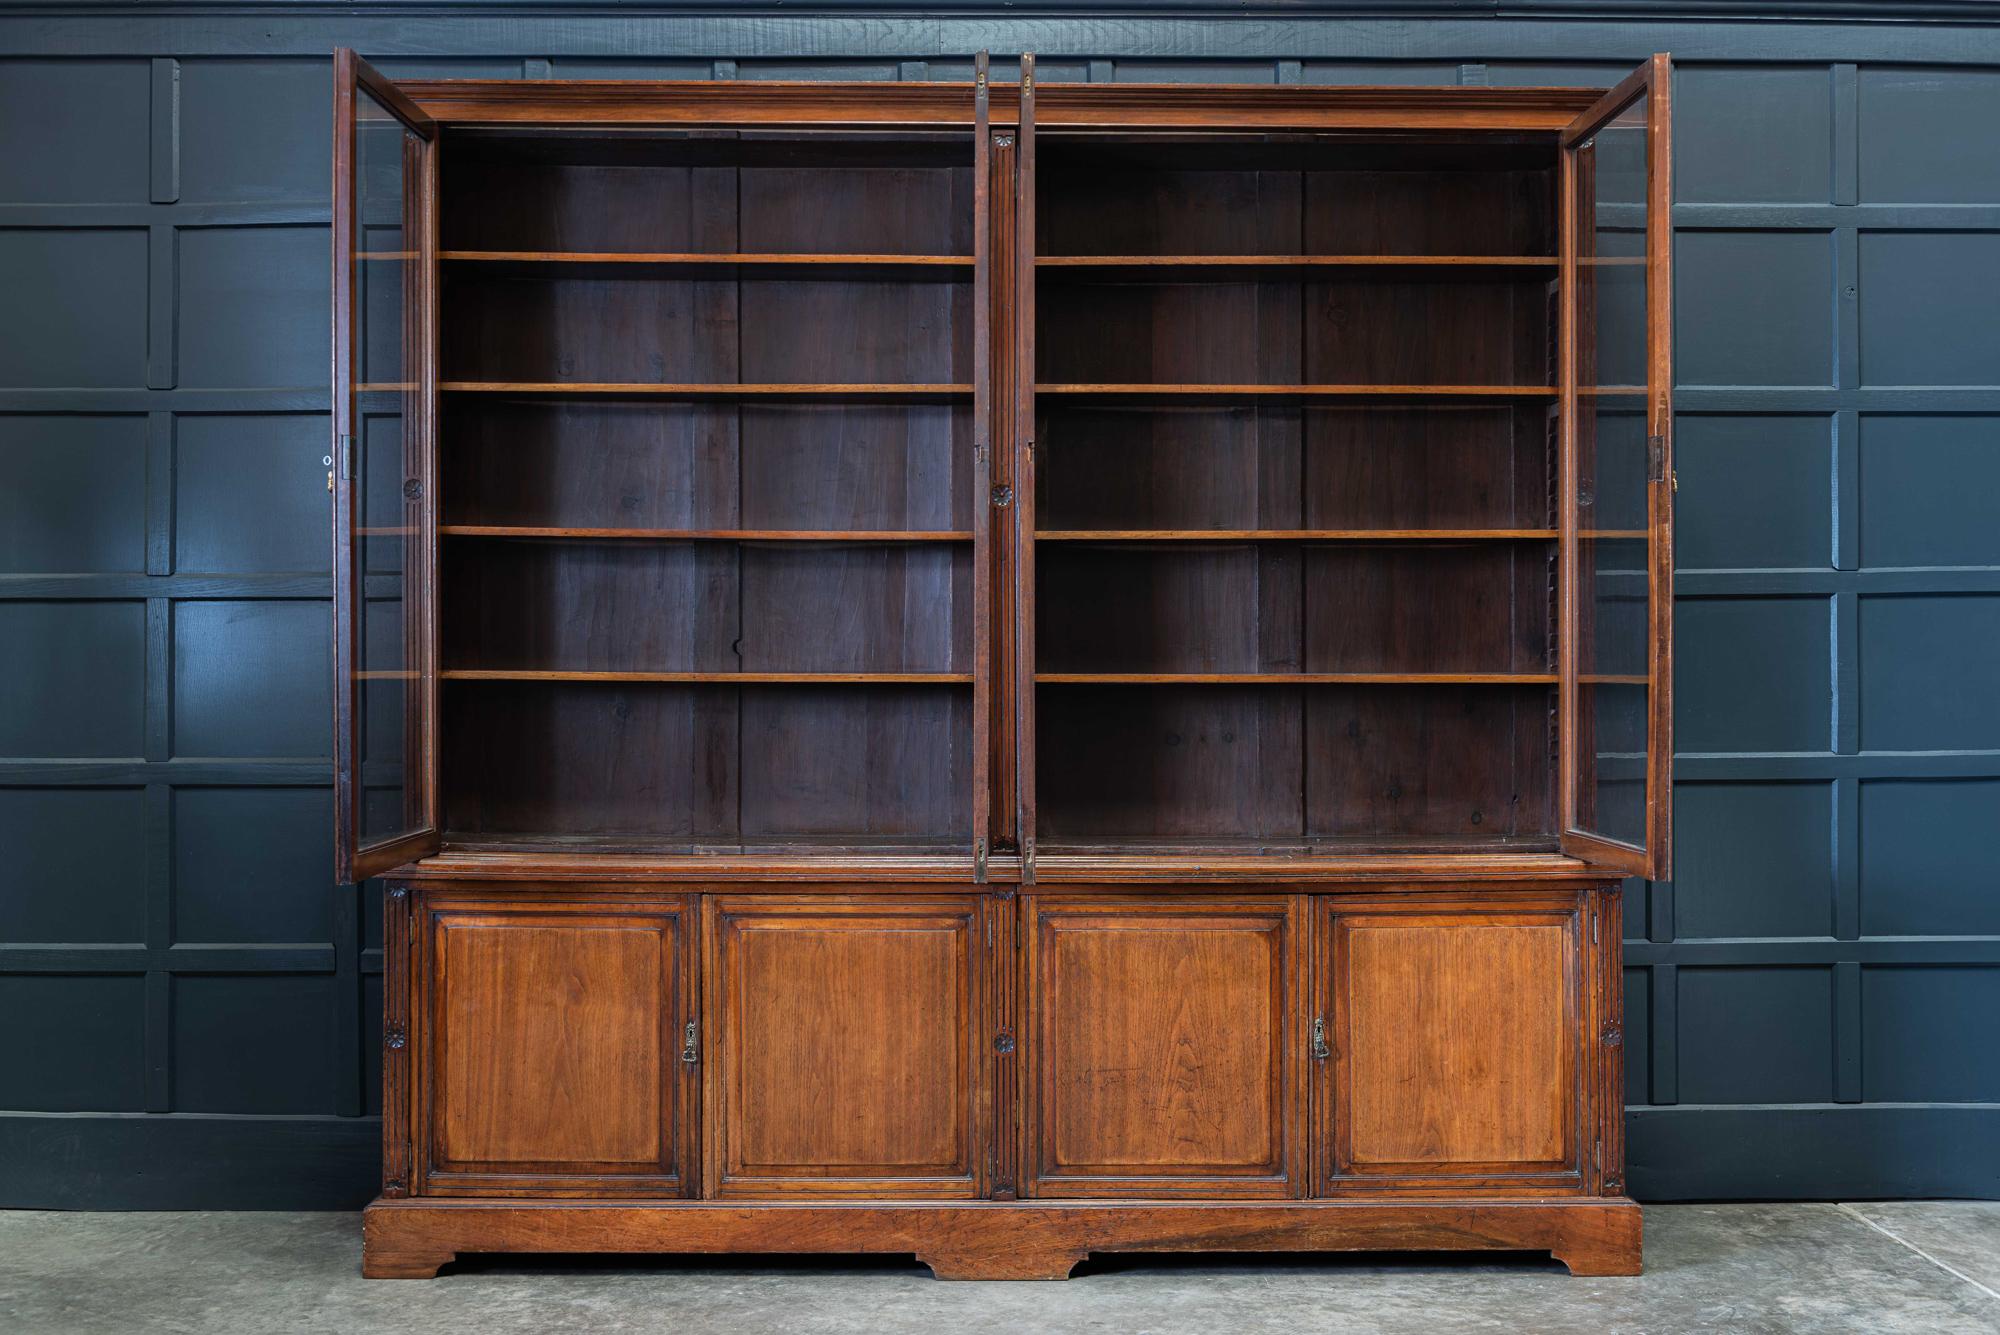 English large mahogany glazed country house bookcase, circa 1900.

Large mahogany glazed country house bookcase
Adjustable shelves and original locking key in 5 sections (Plinth, base, x2 cabinets and cornice.)

Measures: Base W 243 x D 44 x H